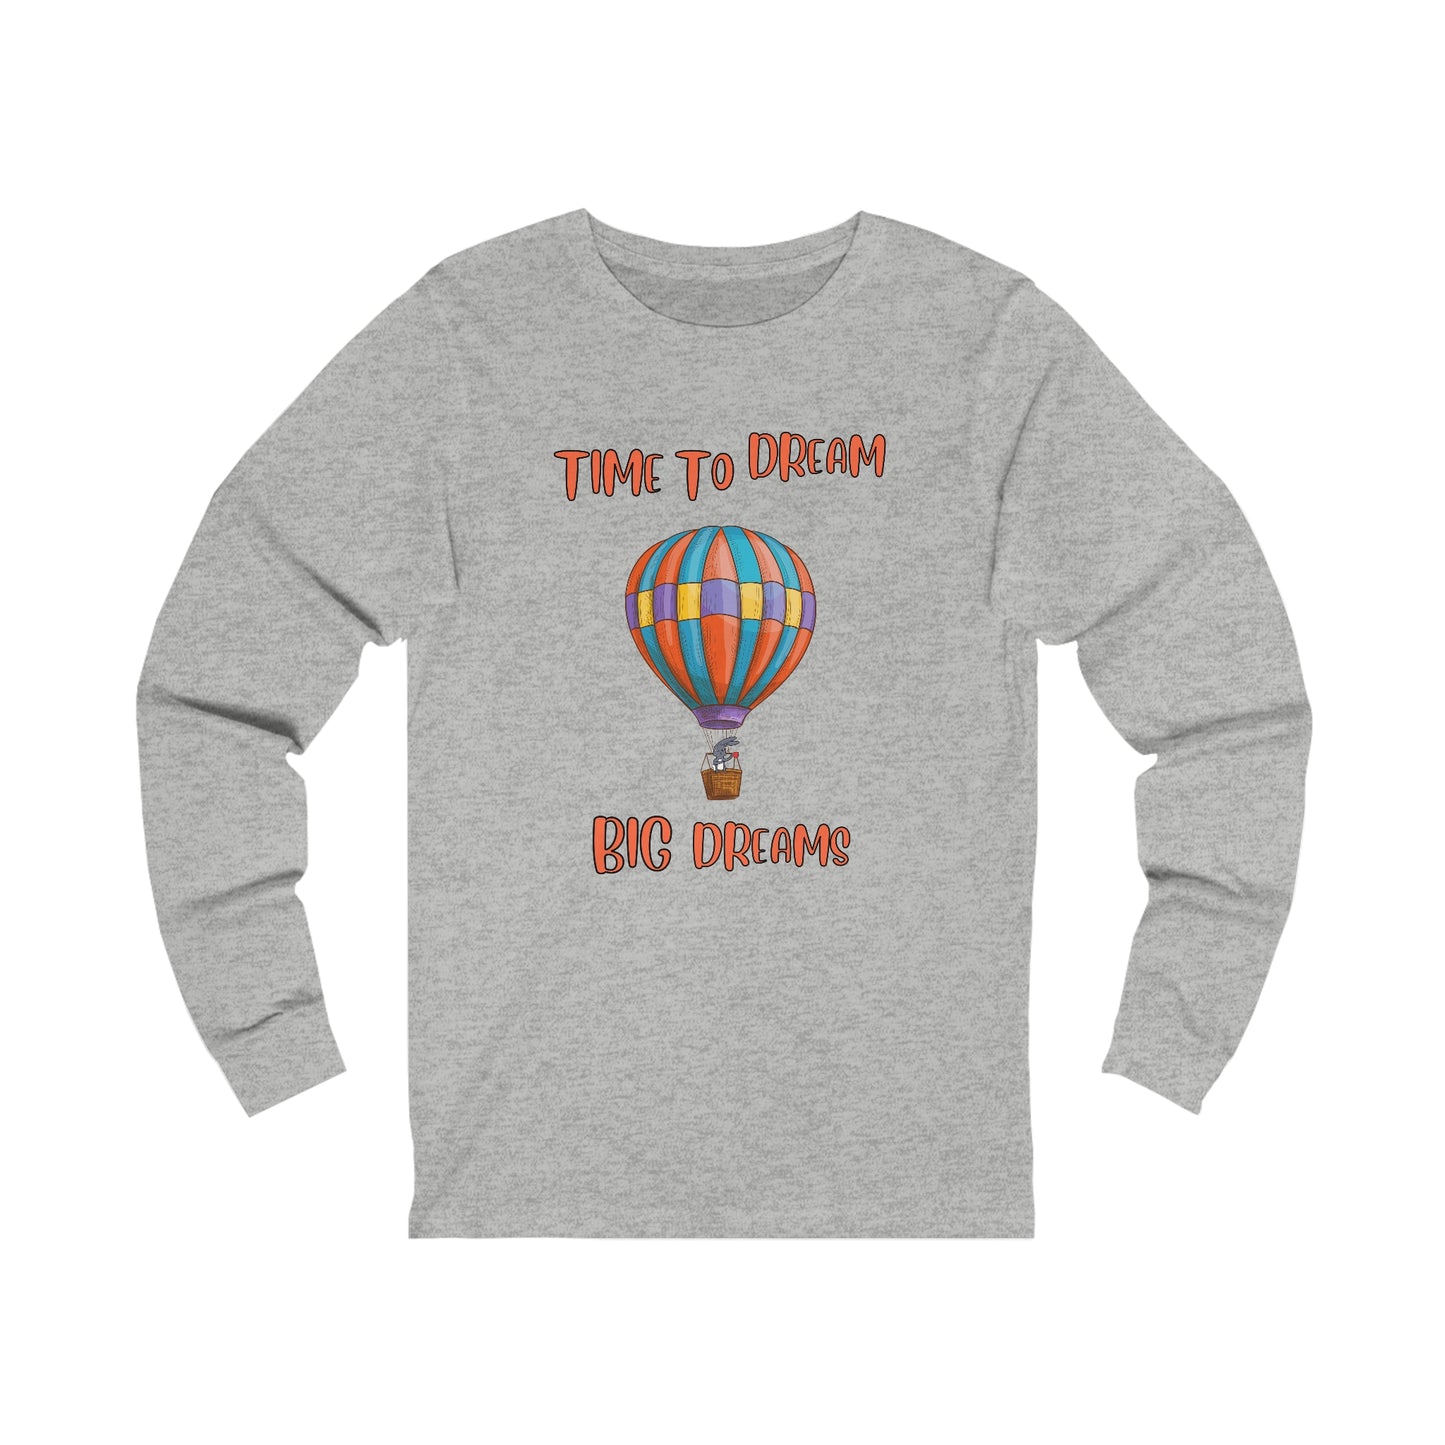 Time To Dream Big Dreams. Unisex Jersey Long Sleeve Tee.